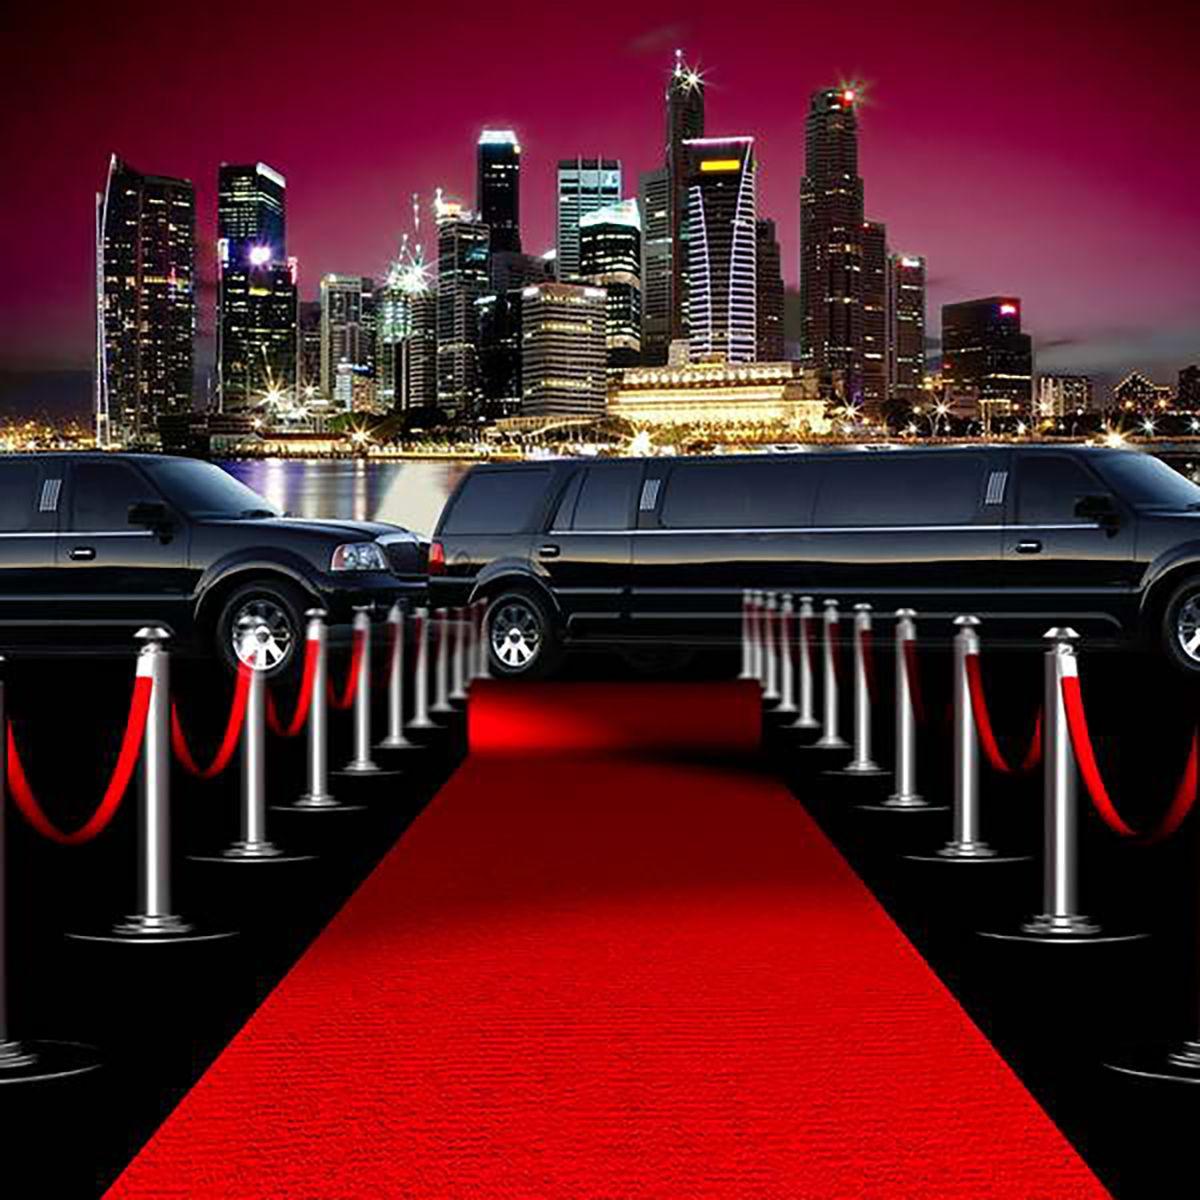 Allenjoy photographic background Red carpet night car city